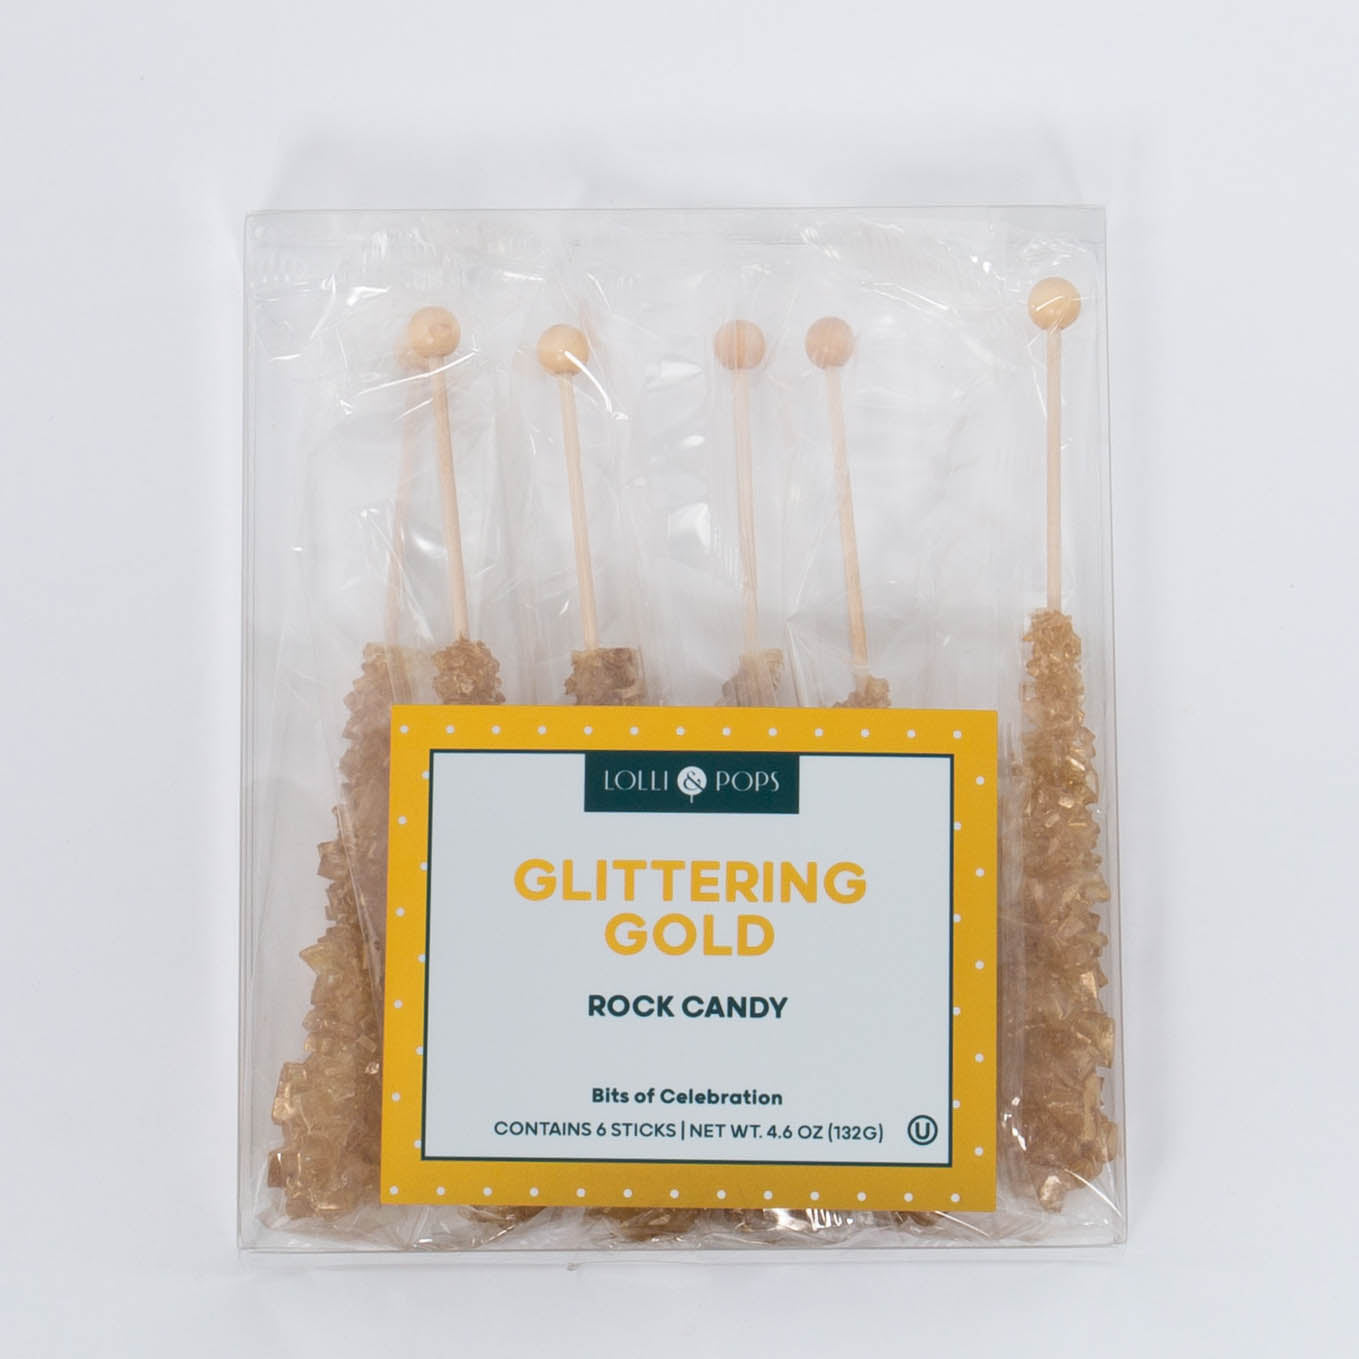 Glittering Gold Rock Candy Pack of six in classic sugar flavor by Lolli & Pops.